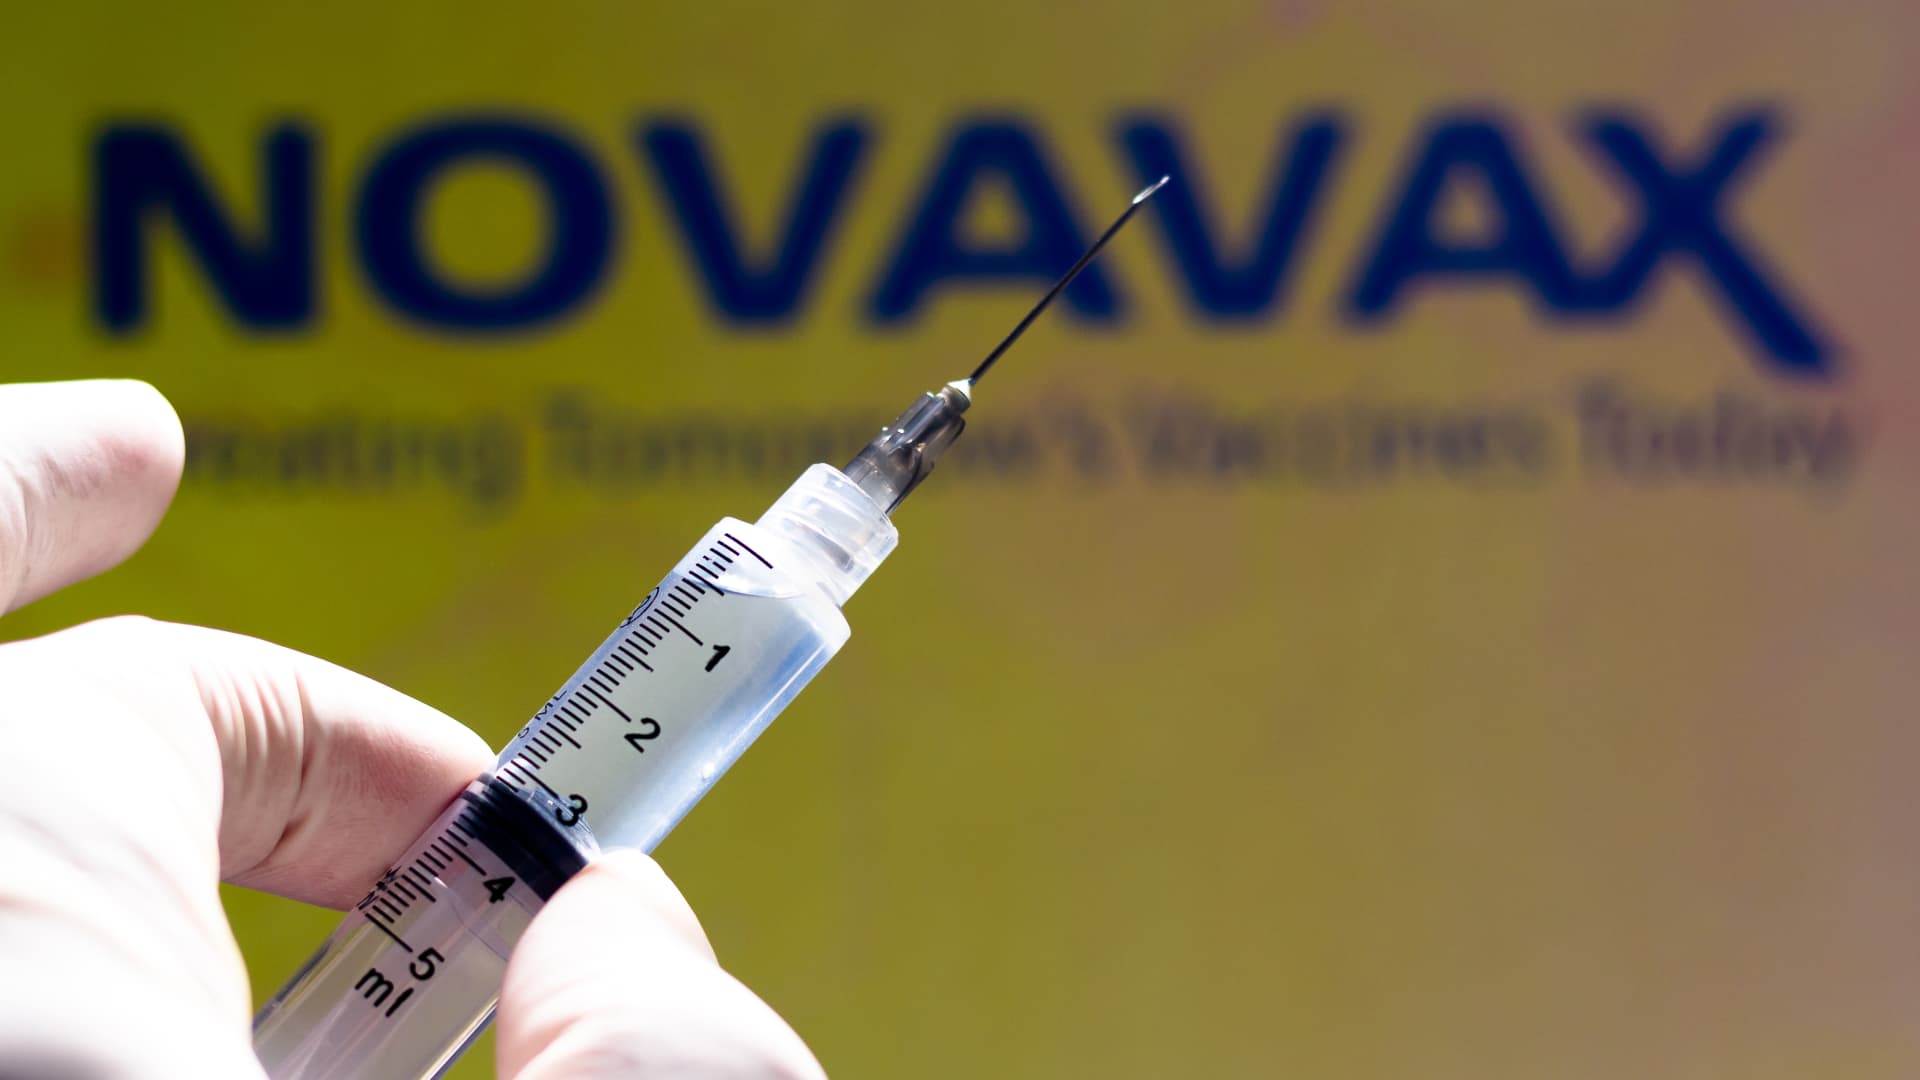 CDC approves Novavax vaccine for adults, shots available in coming weeks